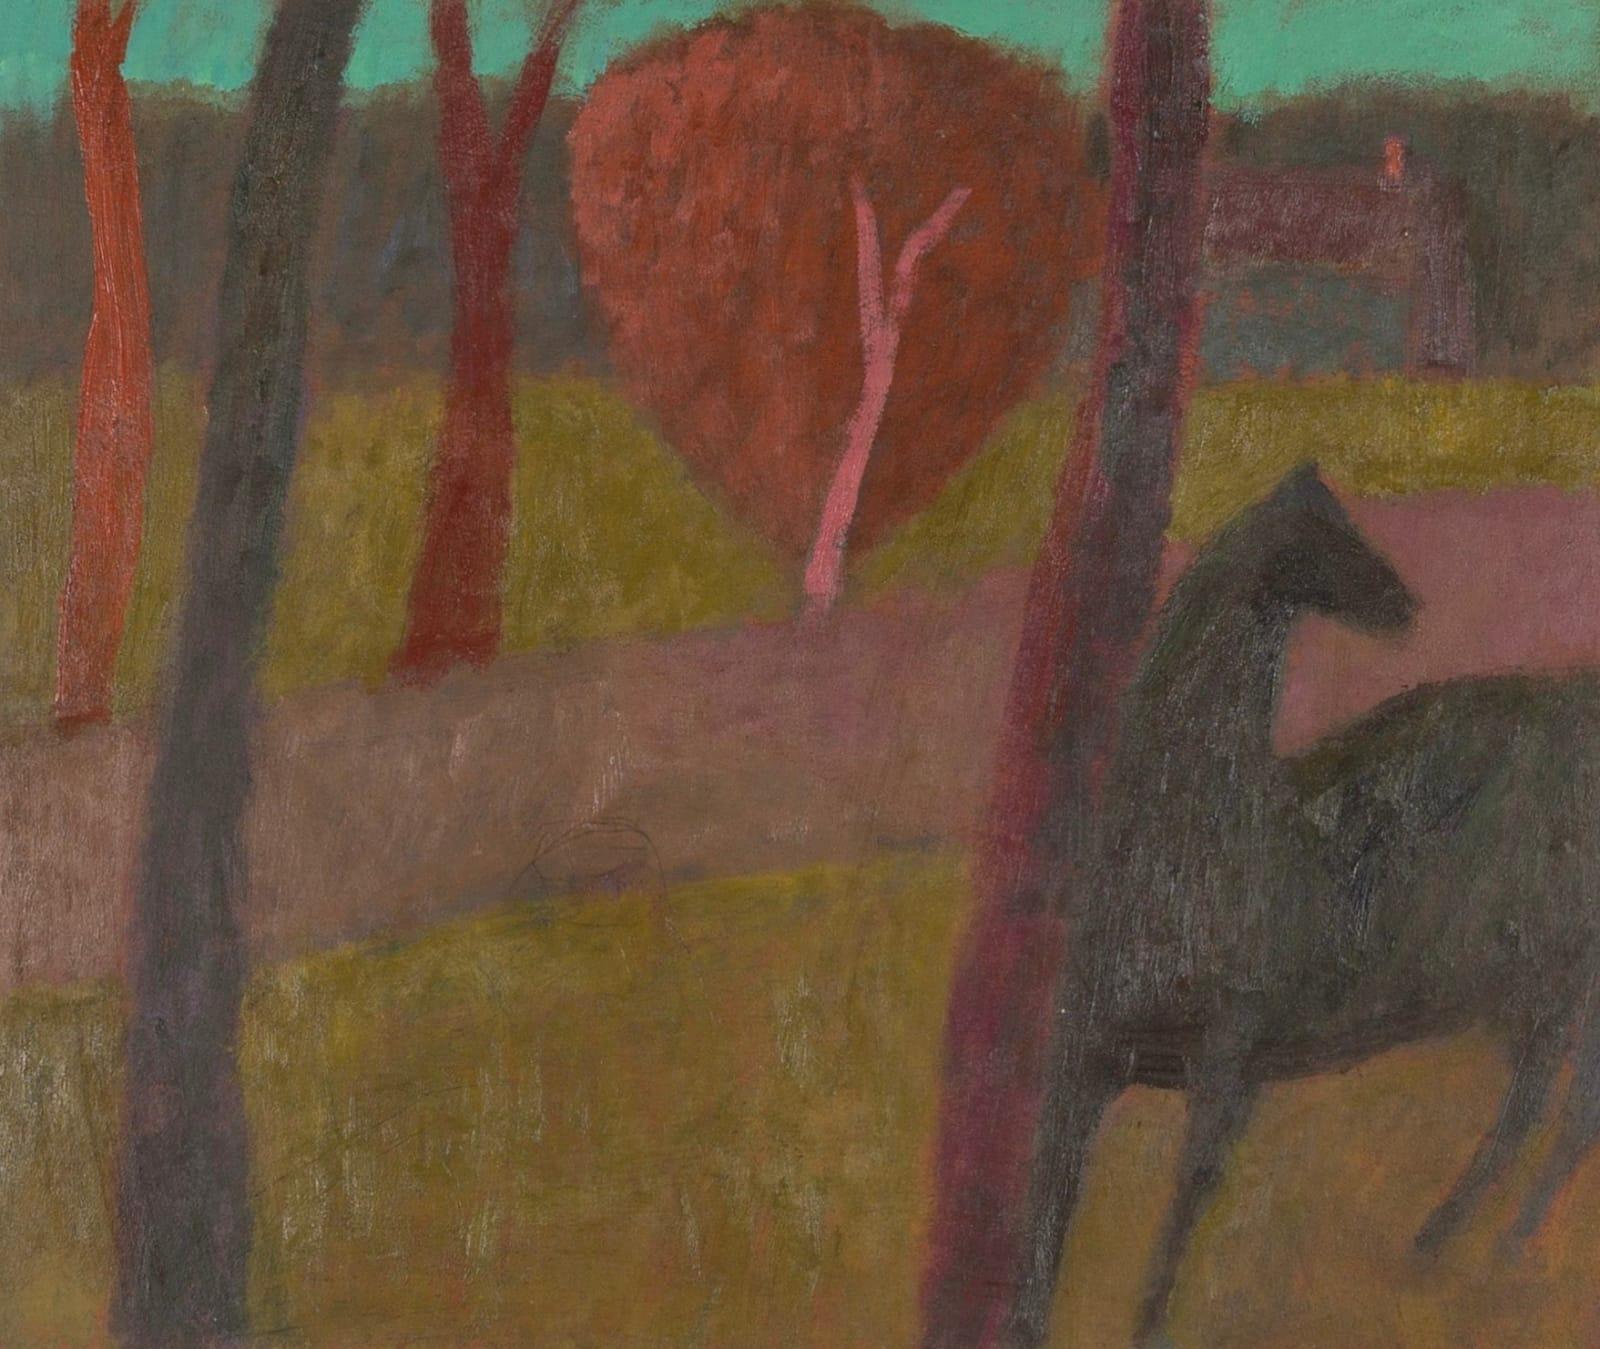 Horse Under Trees Painting by Nicholas Turner, 2022-23